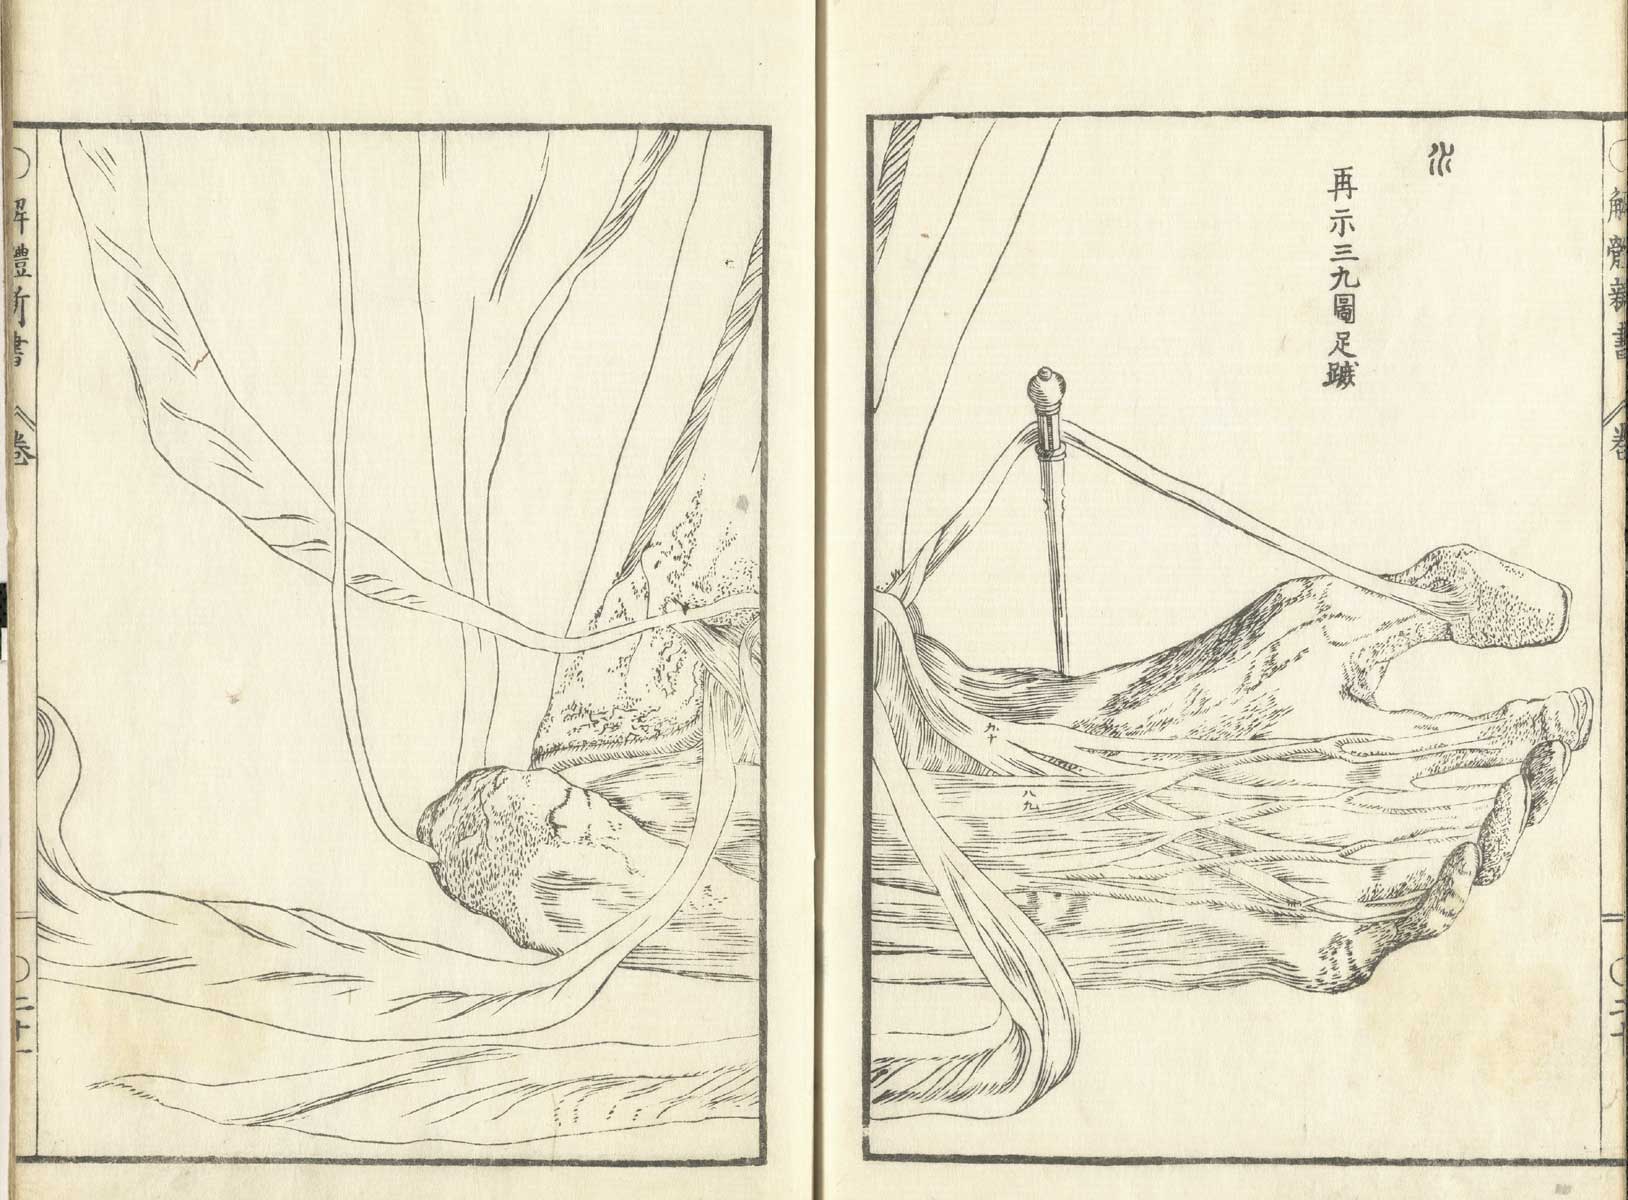 Pages 20 and 21 of Johann Adam Kulmus' Kaitai shinsho, featuring the muscles and tendons from the bottom of a flayed left hand illustrated across both pages.